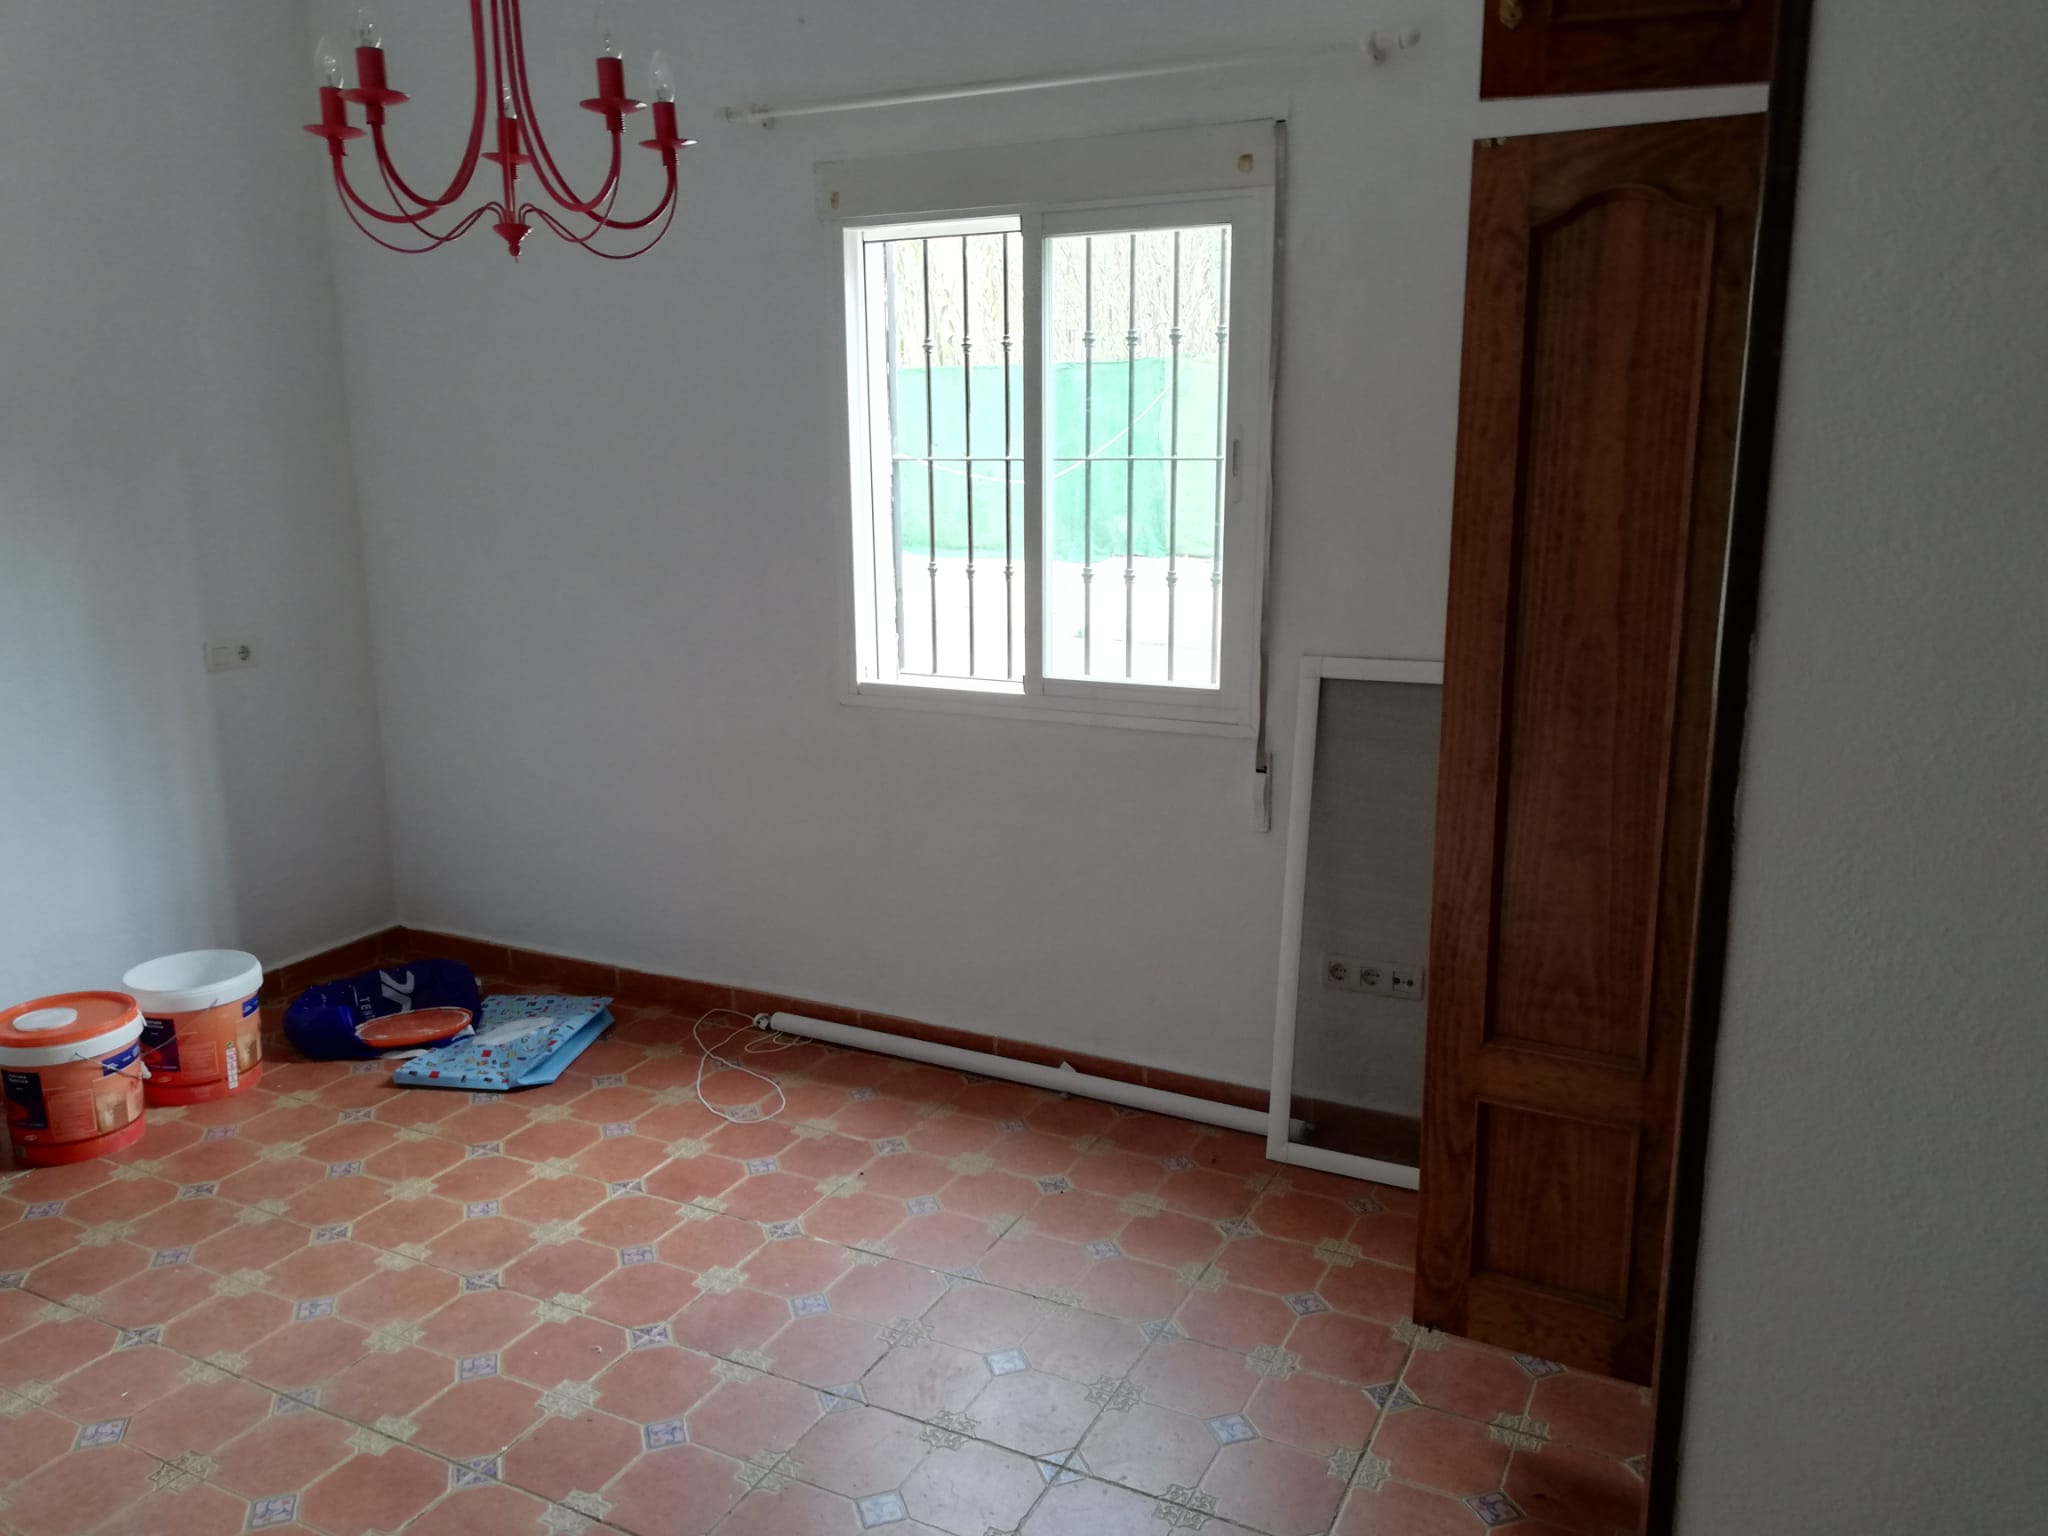 2 bedroom house for rent in Mijas golf - thumb - mibgroup.es